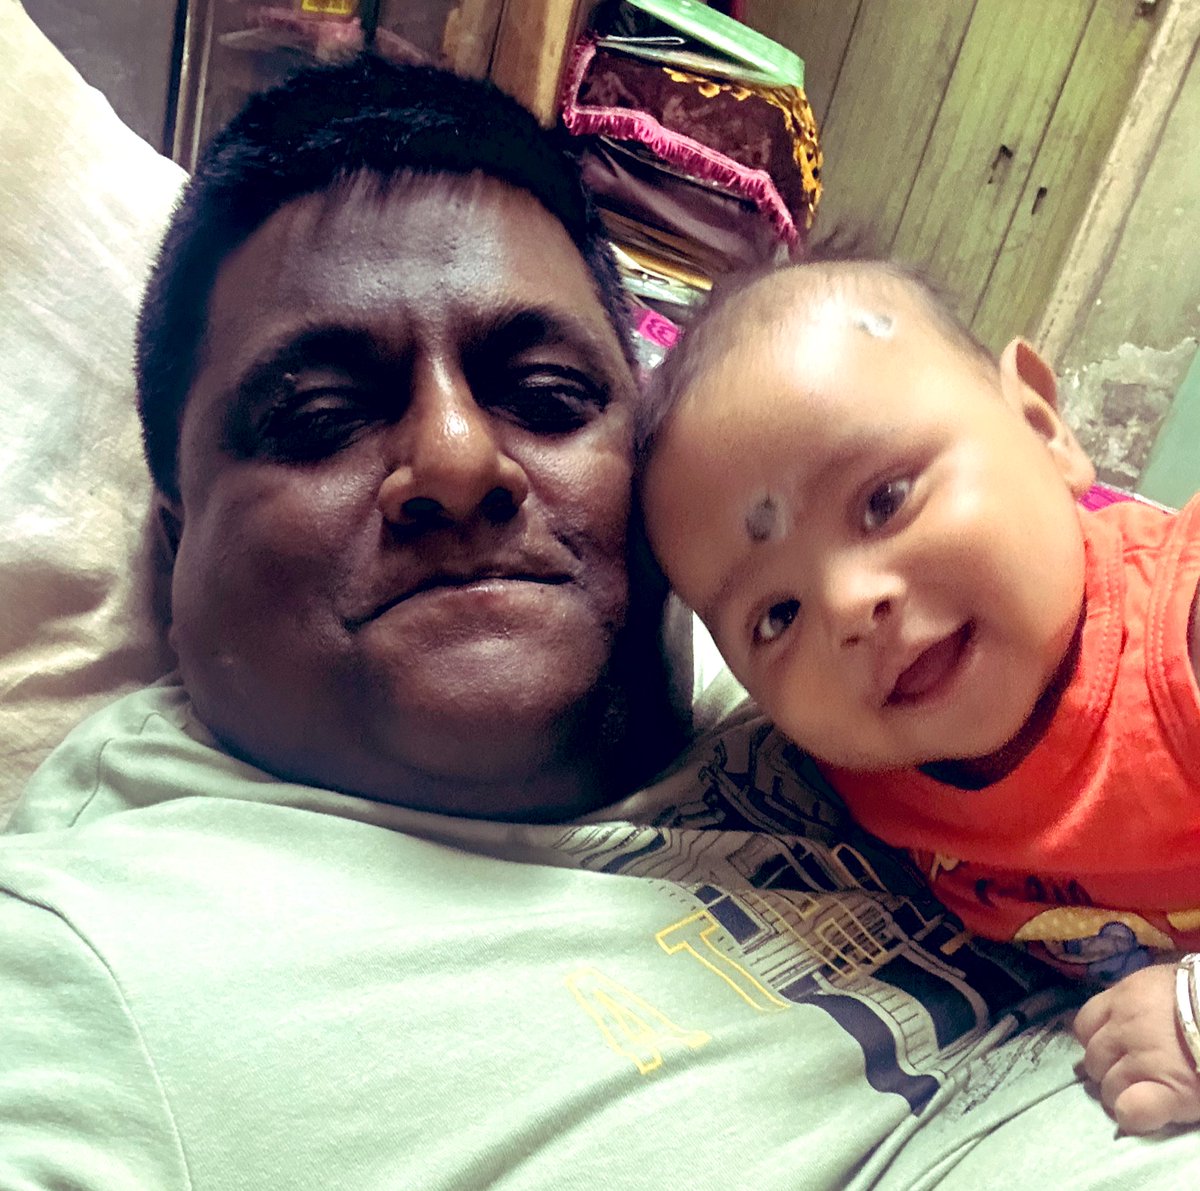 The little one is two months old, son of Najima Sultana @ Nupur. Can you suggest a good Vedic name for him ? GharWapsi is one of the major movements to stop islamisation in Bharat. #islamisation #gharwapsi Please join us in this movement and send your generous contribution to